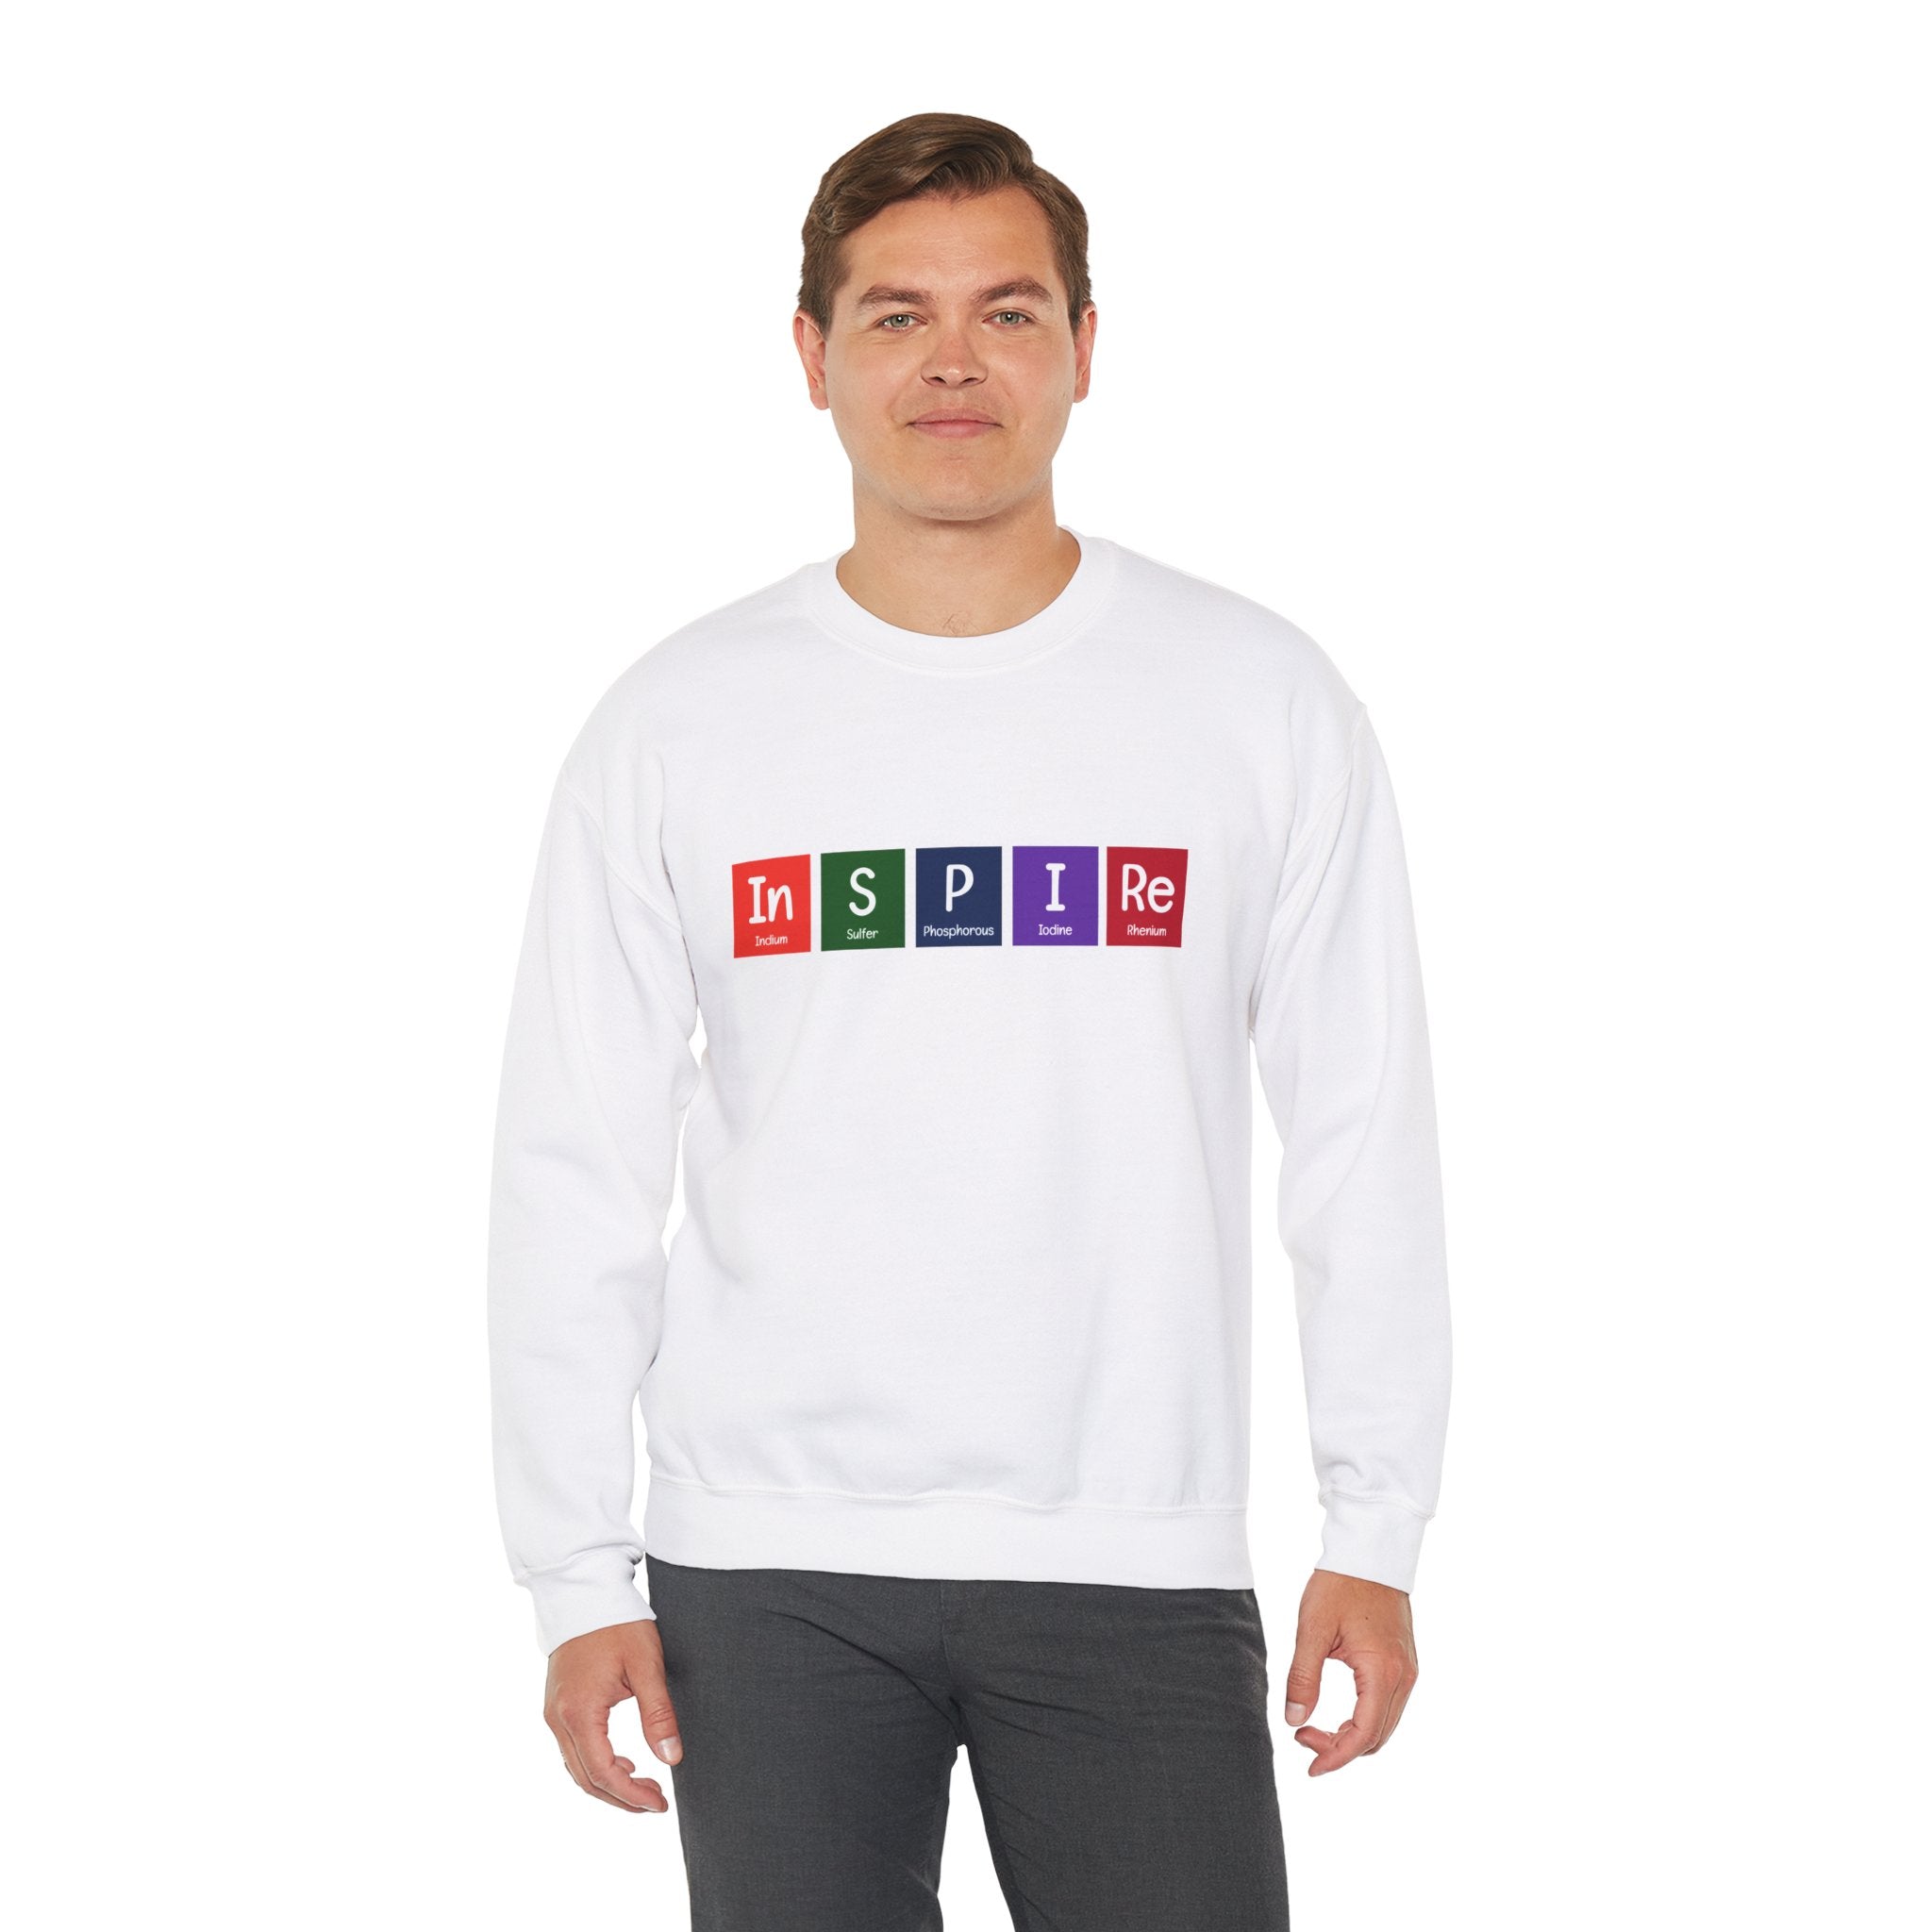 A man, standing against a plain white background, is wearing a cozy In-S-P-I-Re - Sweatshirt perfect for the colder months. The white sweatshirt features the word "INSPIRE" written using elements from the periodic table.